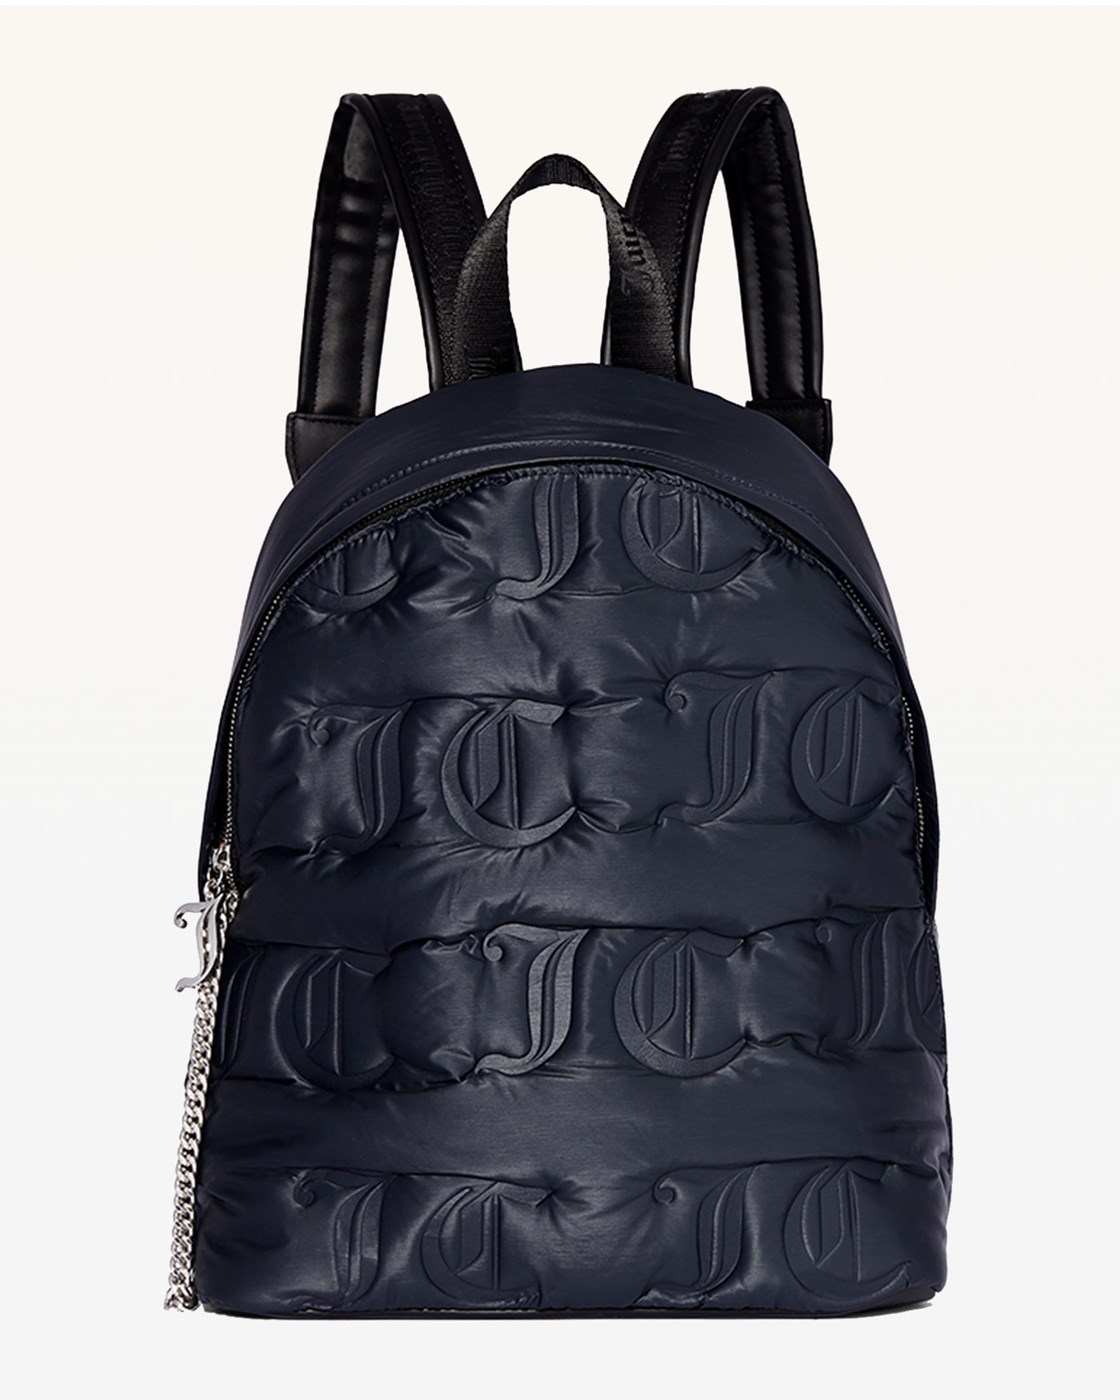 Juicy Couture Shiny Delta Backpack